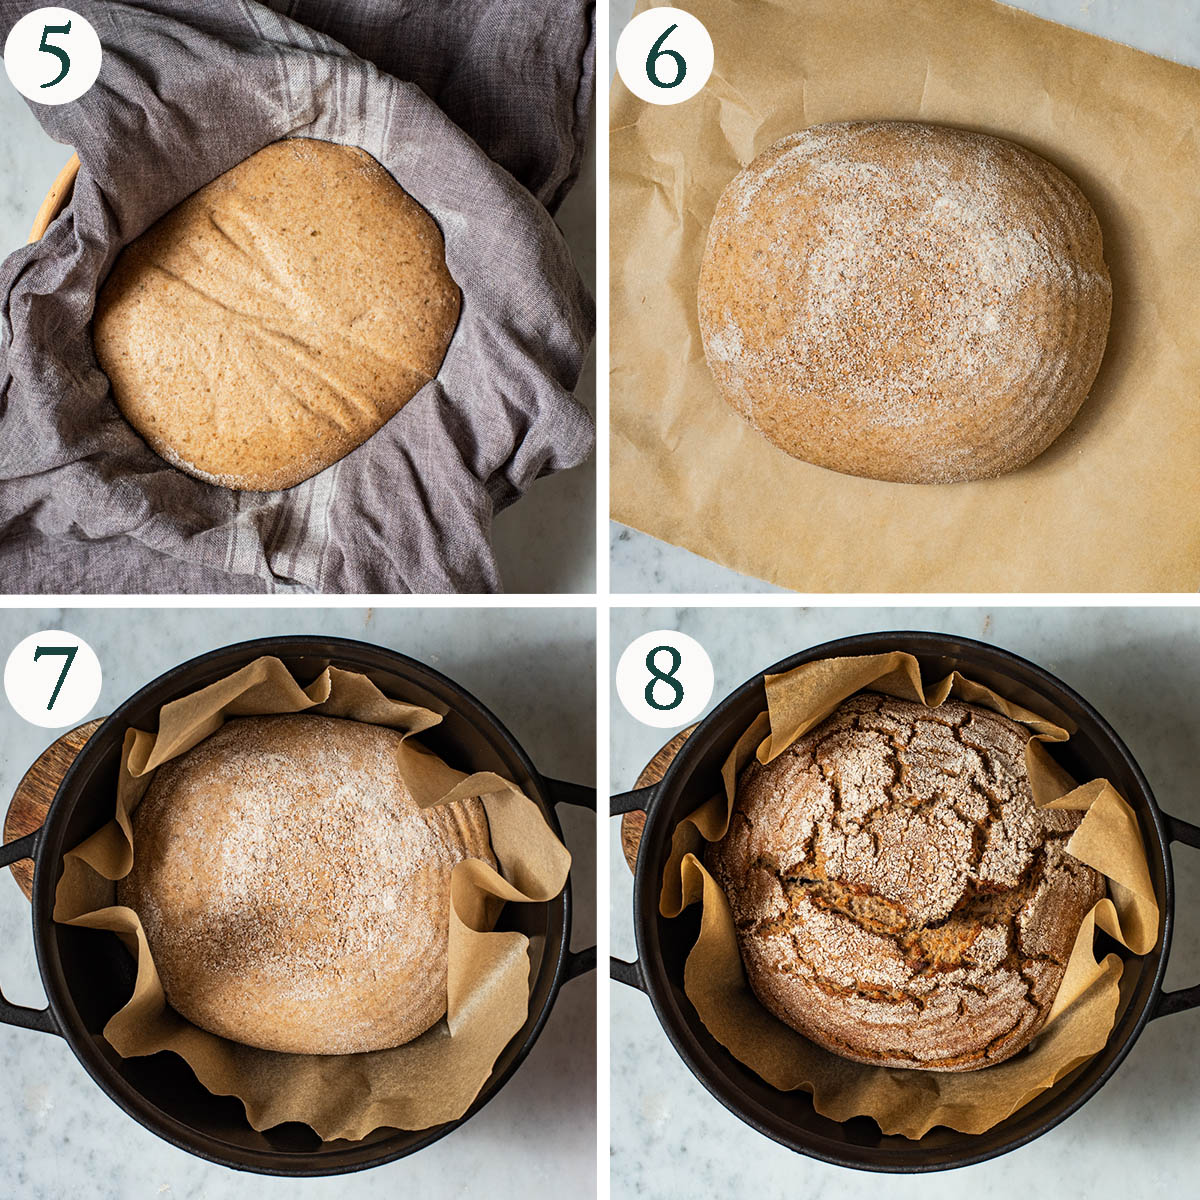 Sourdough steps 5 to 8, risen dough, turned out onto paper, and before and after baking.